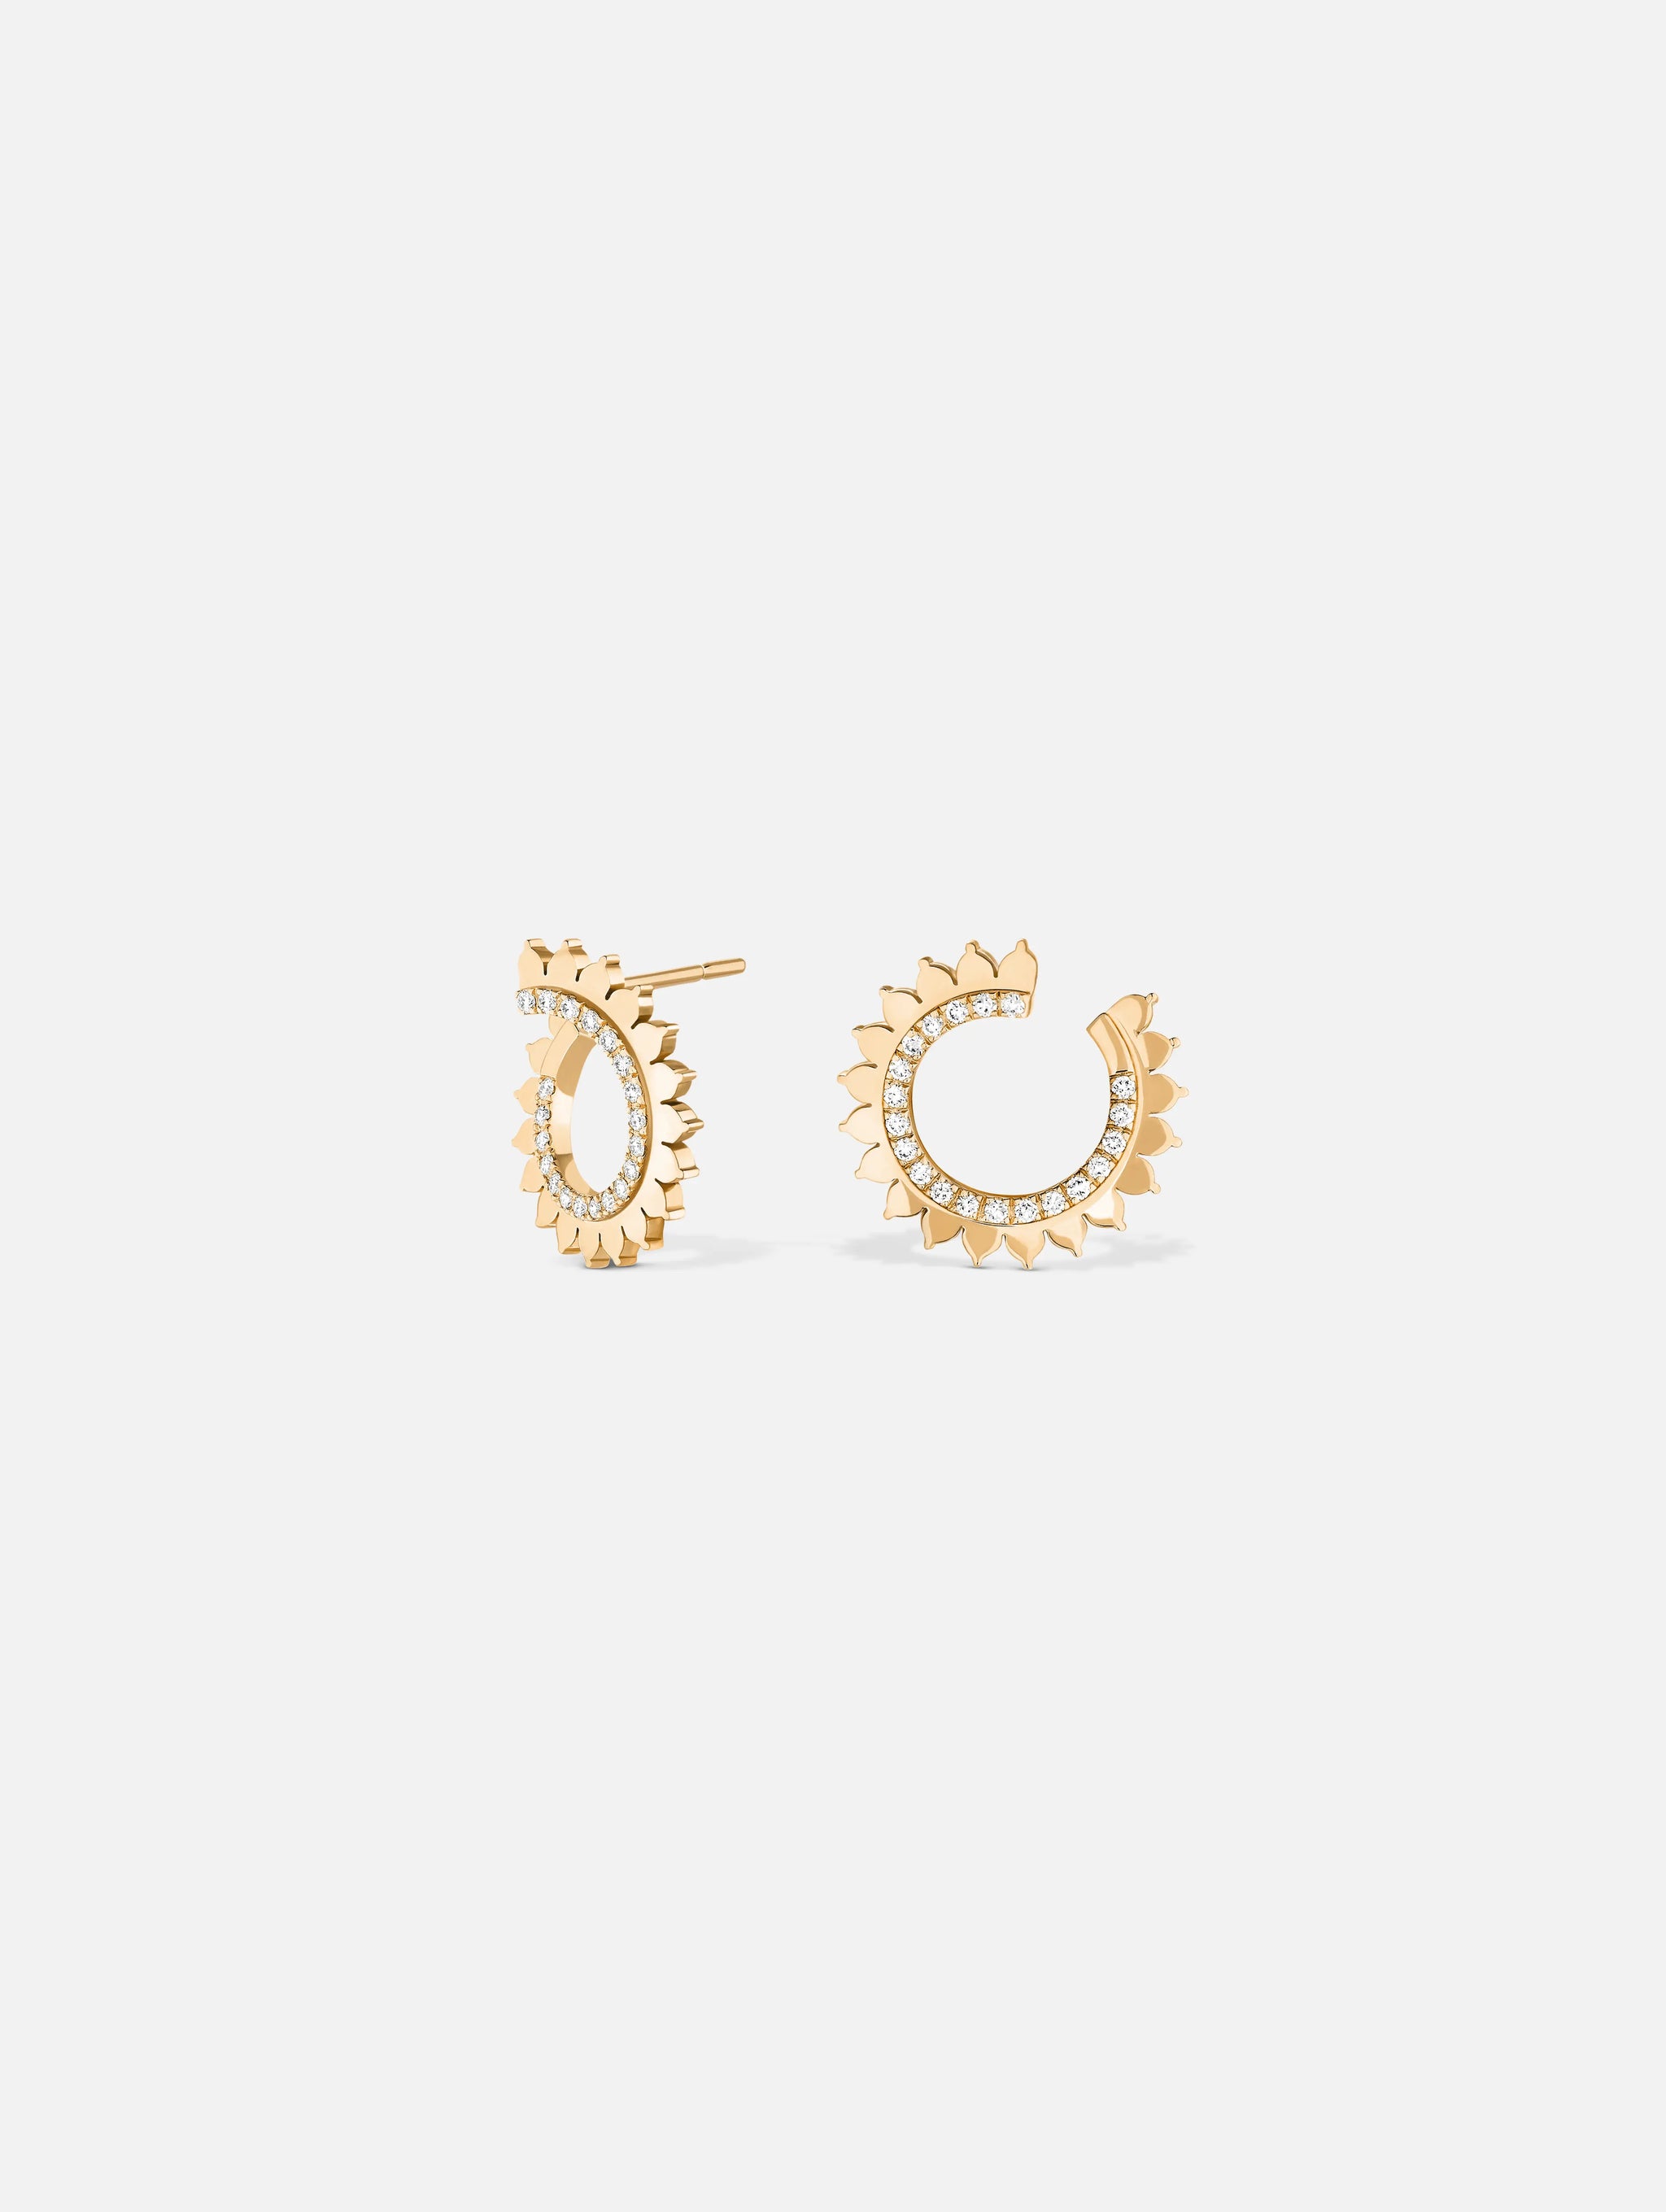 Yellow Gold Earrings - 1 - Nouvel Heritage